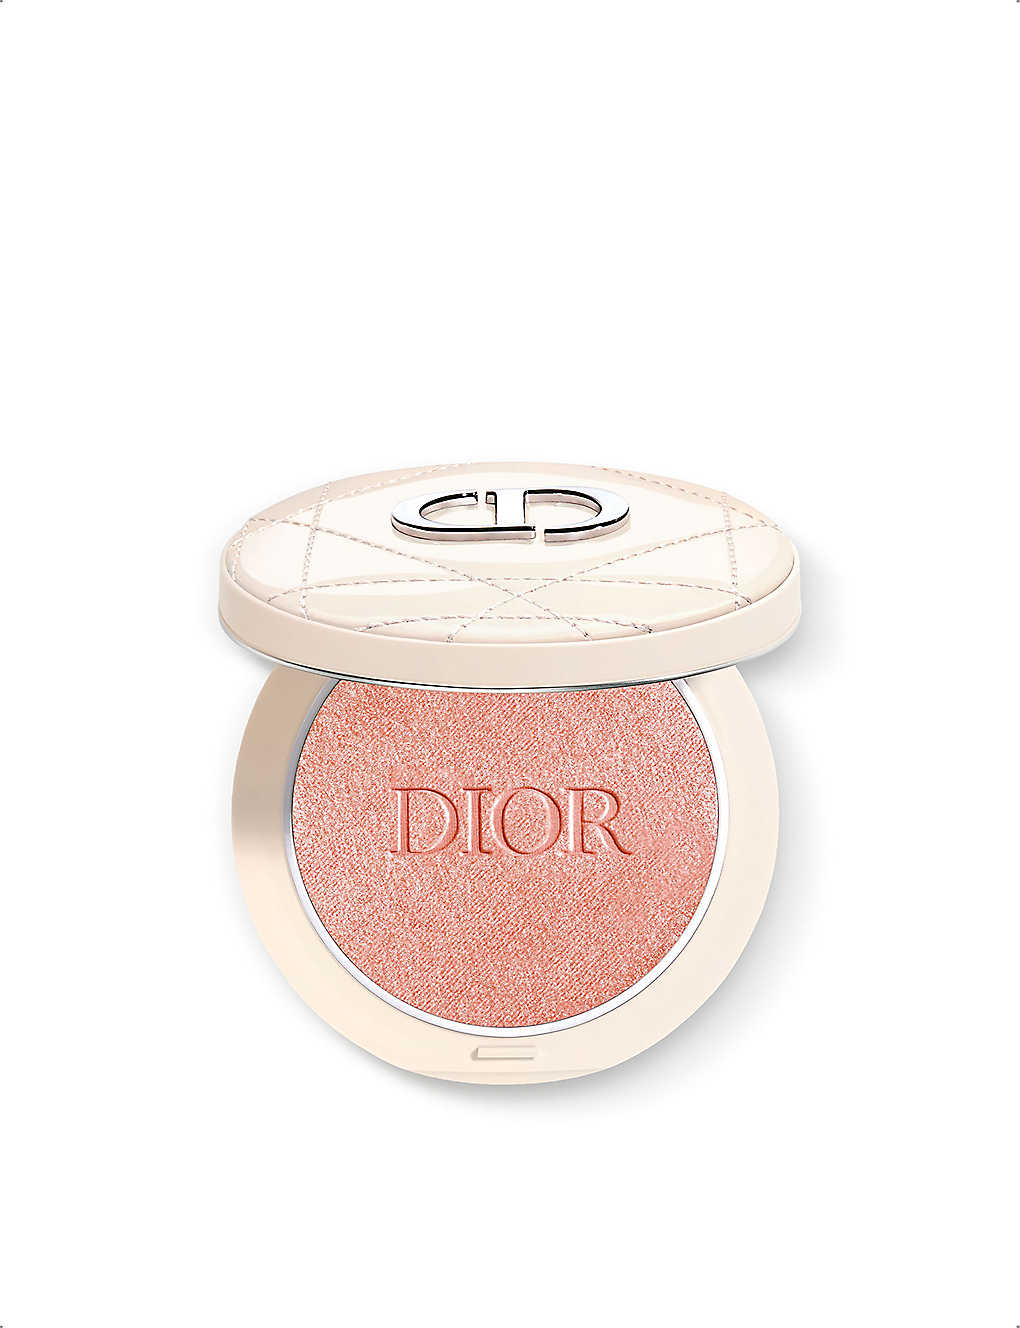 Dior 06 Coral Glow Forever Couture Luminizer Intense Highlighting Powder 6g